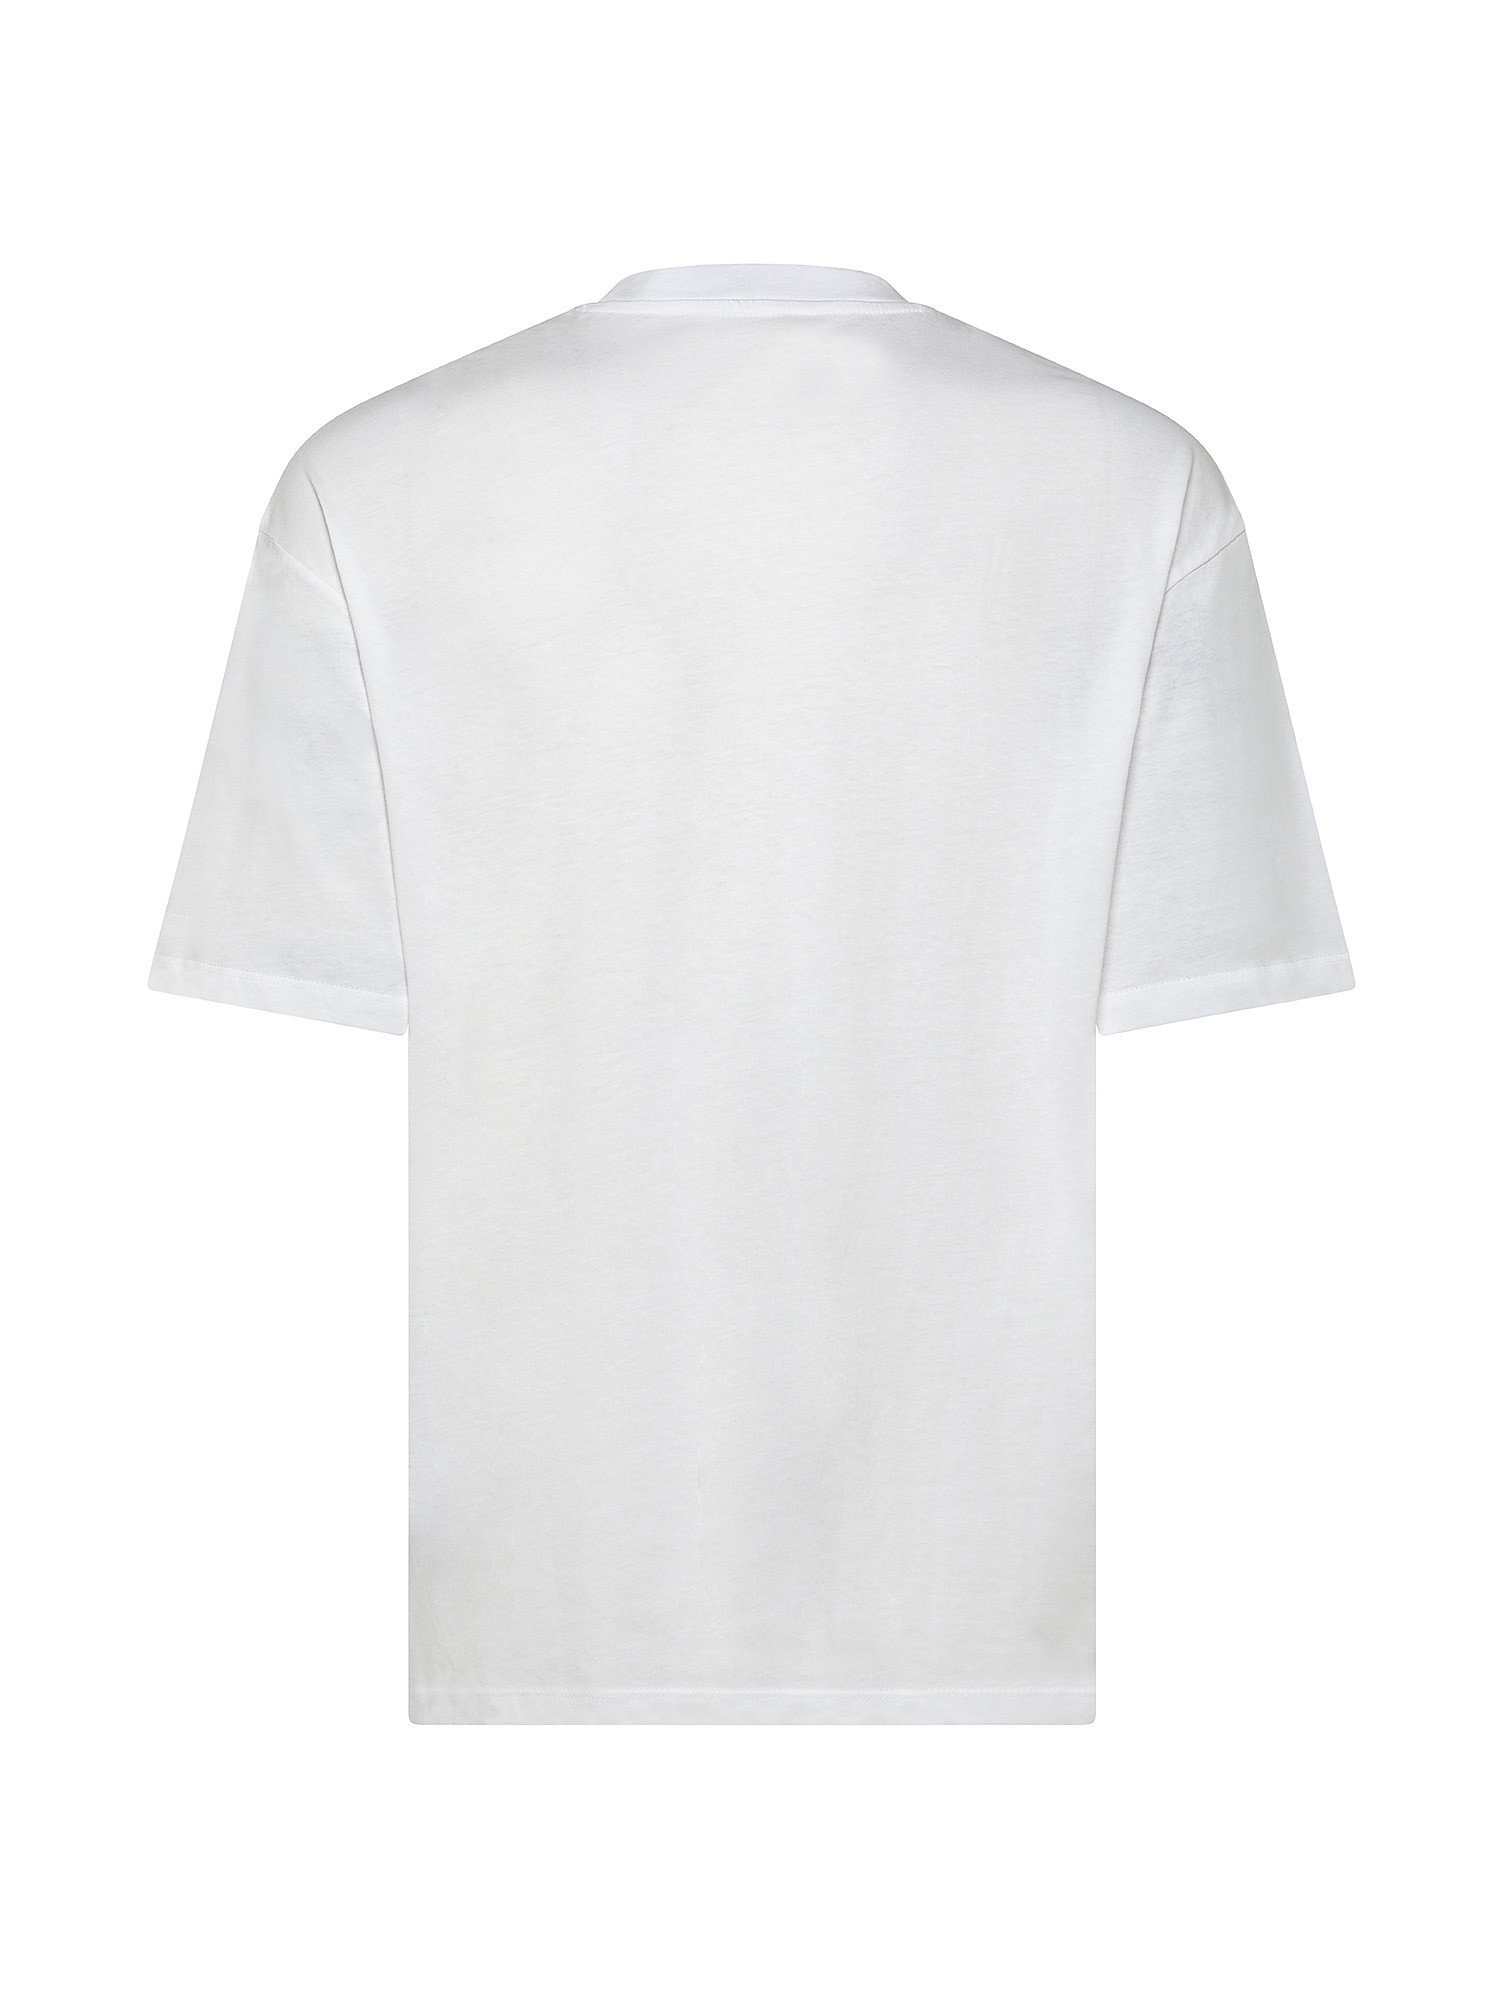 T-shirt in 100% cotton, White, large image number 1